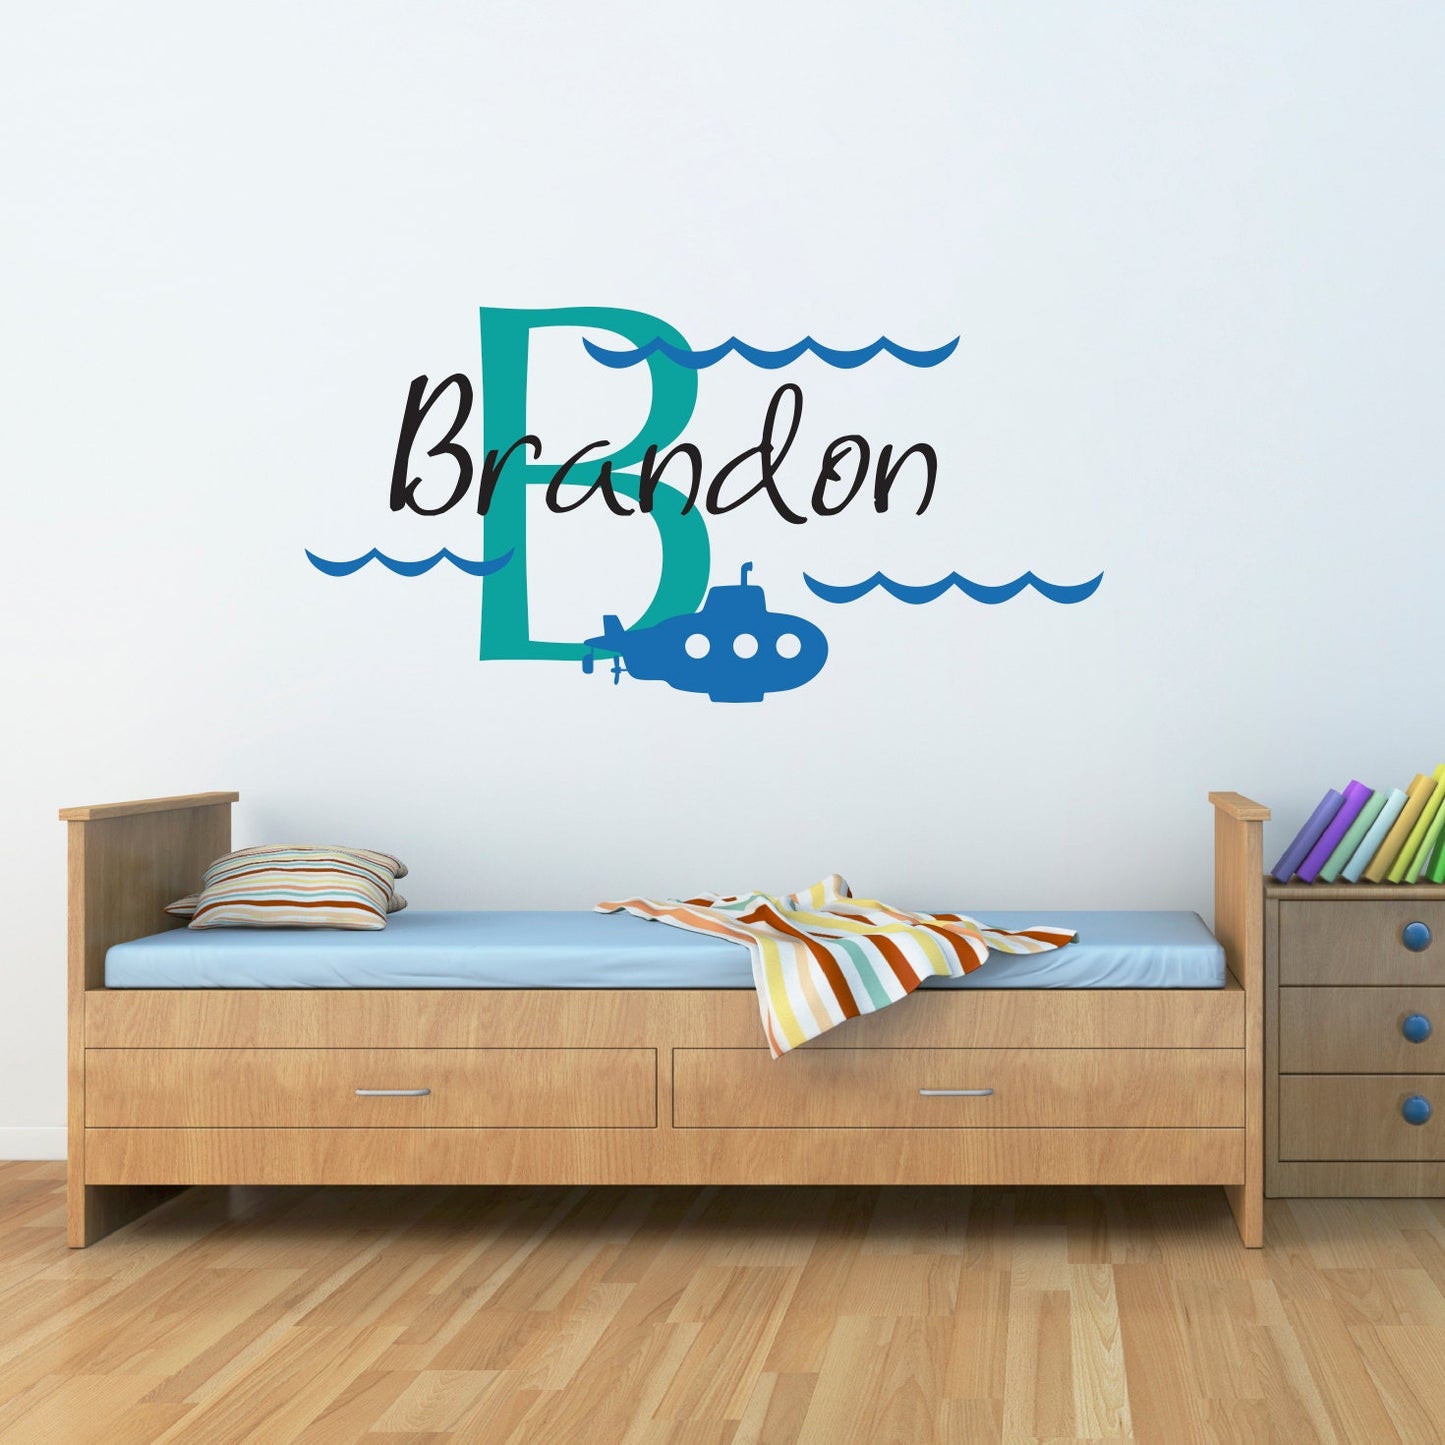 Initial Boys Name Wall Decal - Submarine Decal - Personalized Boy Decal - Large